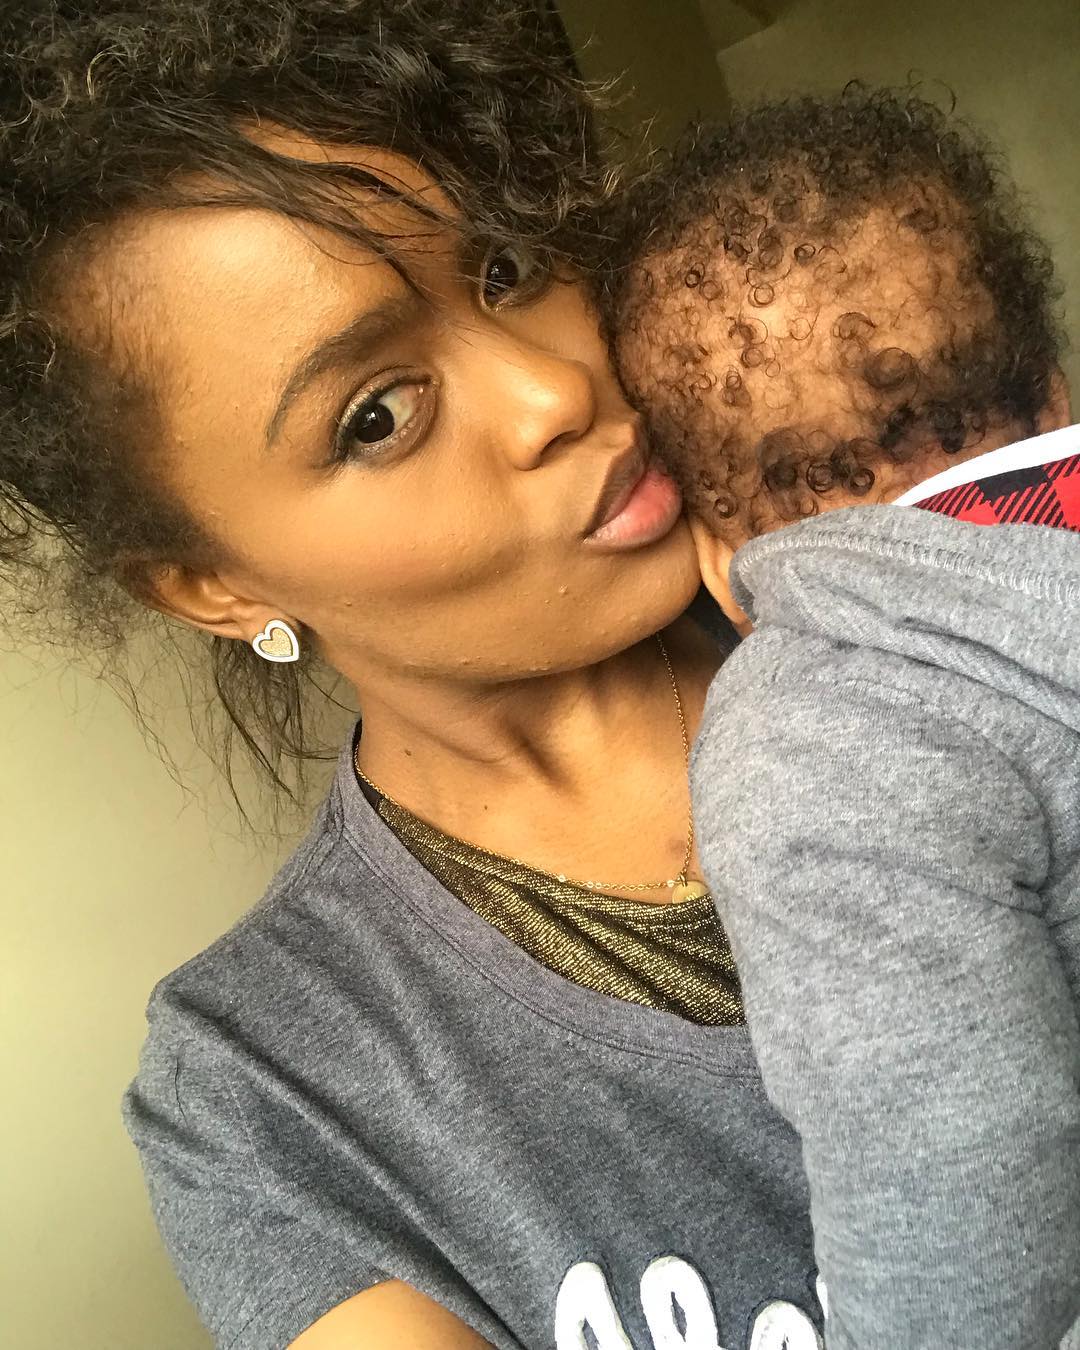 I am not a single mom - Avril talks about her baby daddy